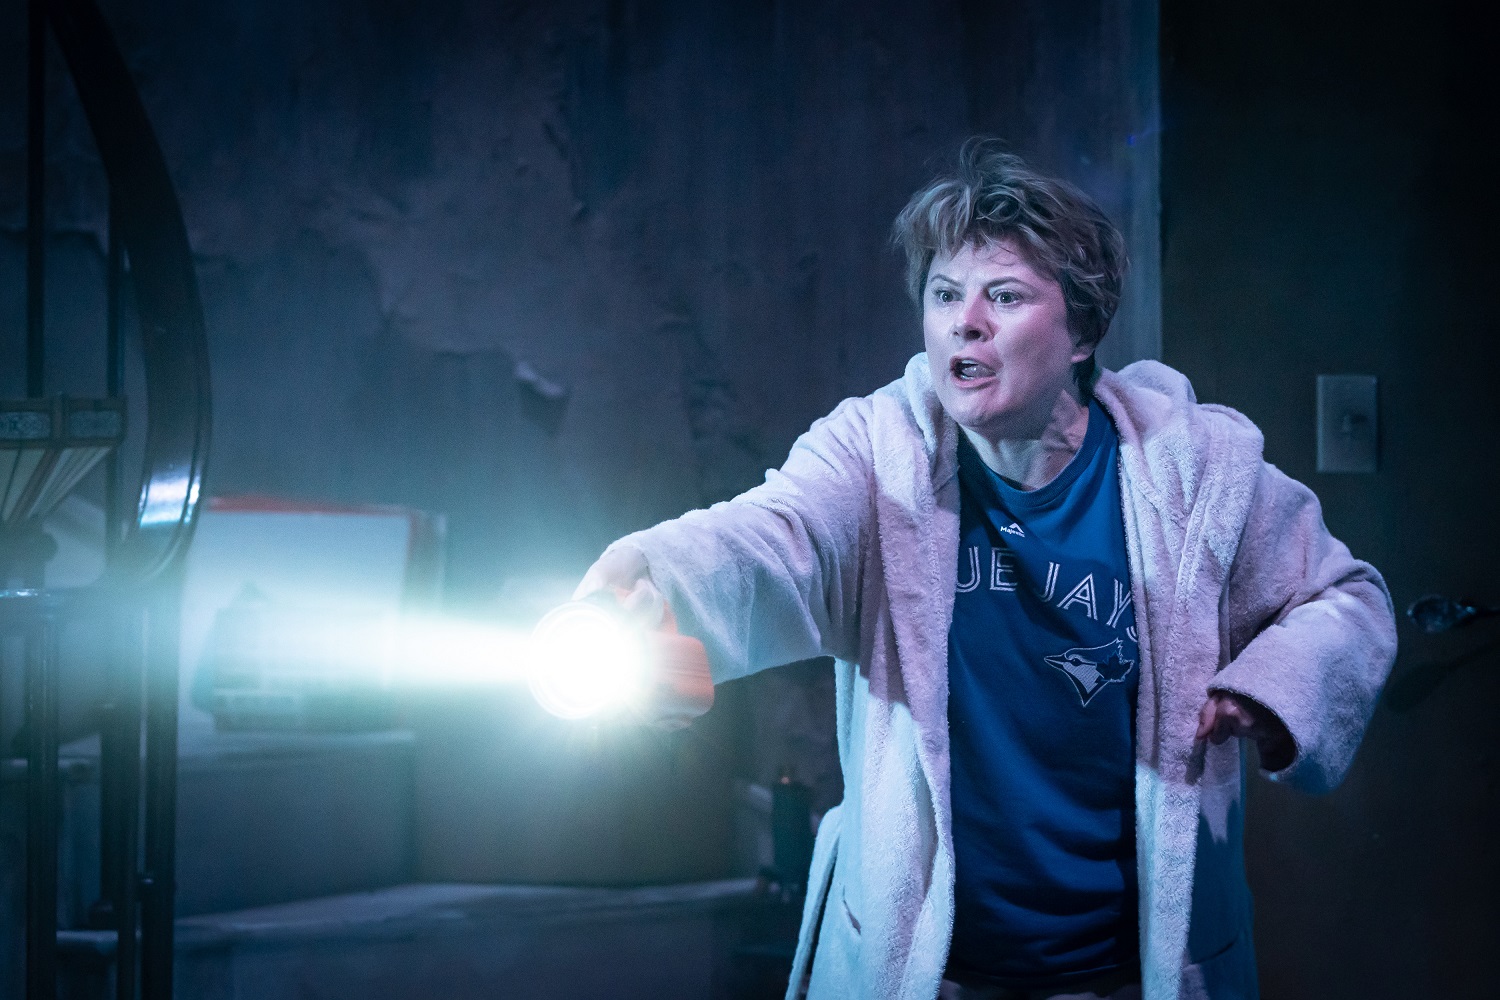 Monica Dolan (Toni) in Appropriate at the Donmar Warehouse